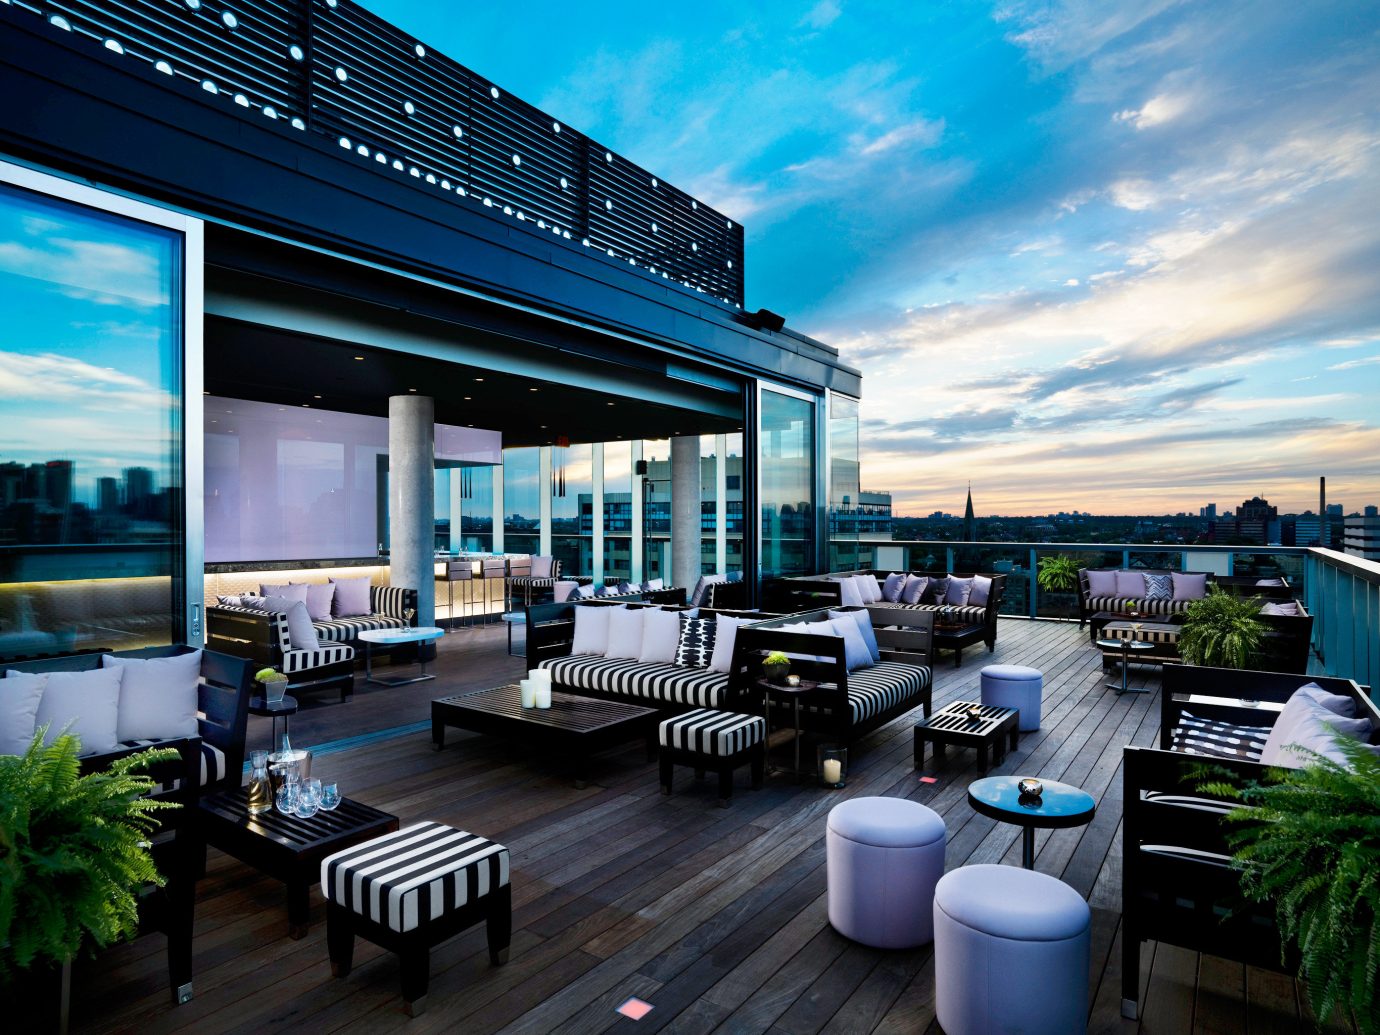 Bar City Hip Jetsetter Guides Lounge Modern Patio Pool Romance Rooftop Scenic views Trip Ideas sky outdoor condominium property Architecture real estate home interior design headquarters estate facade Design professional convention center window covering furniture